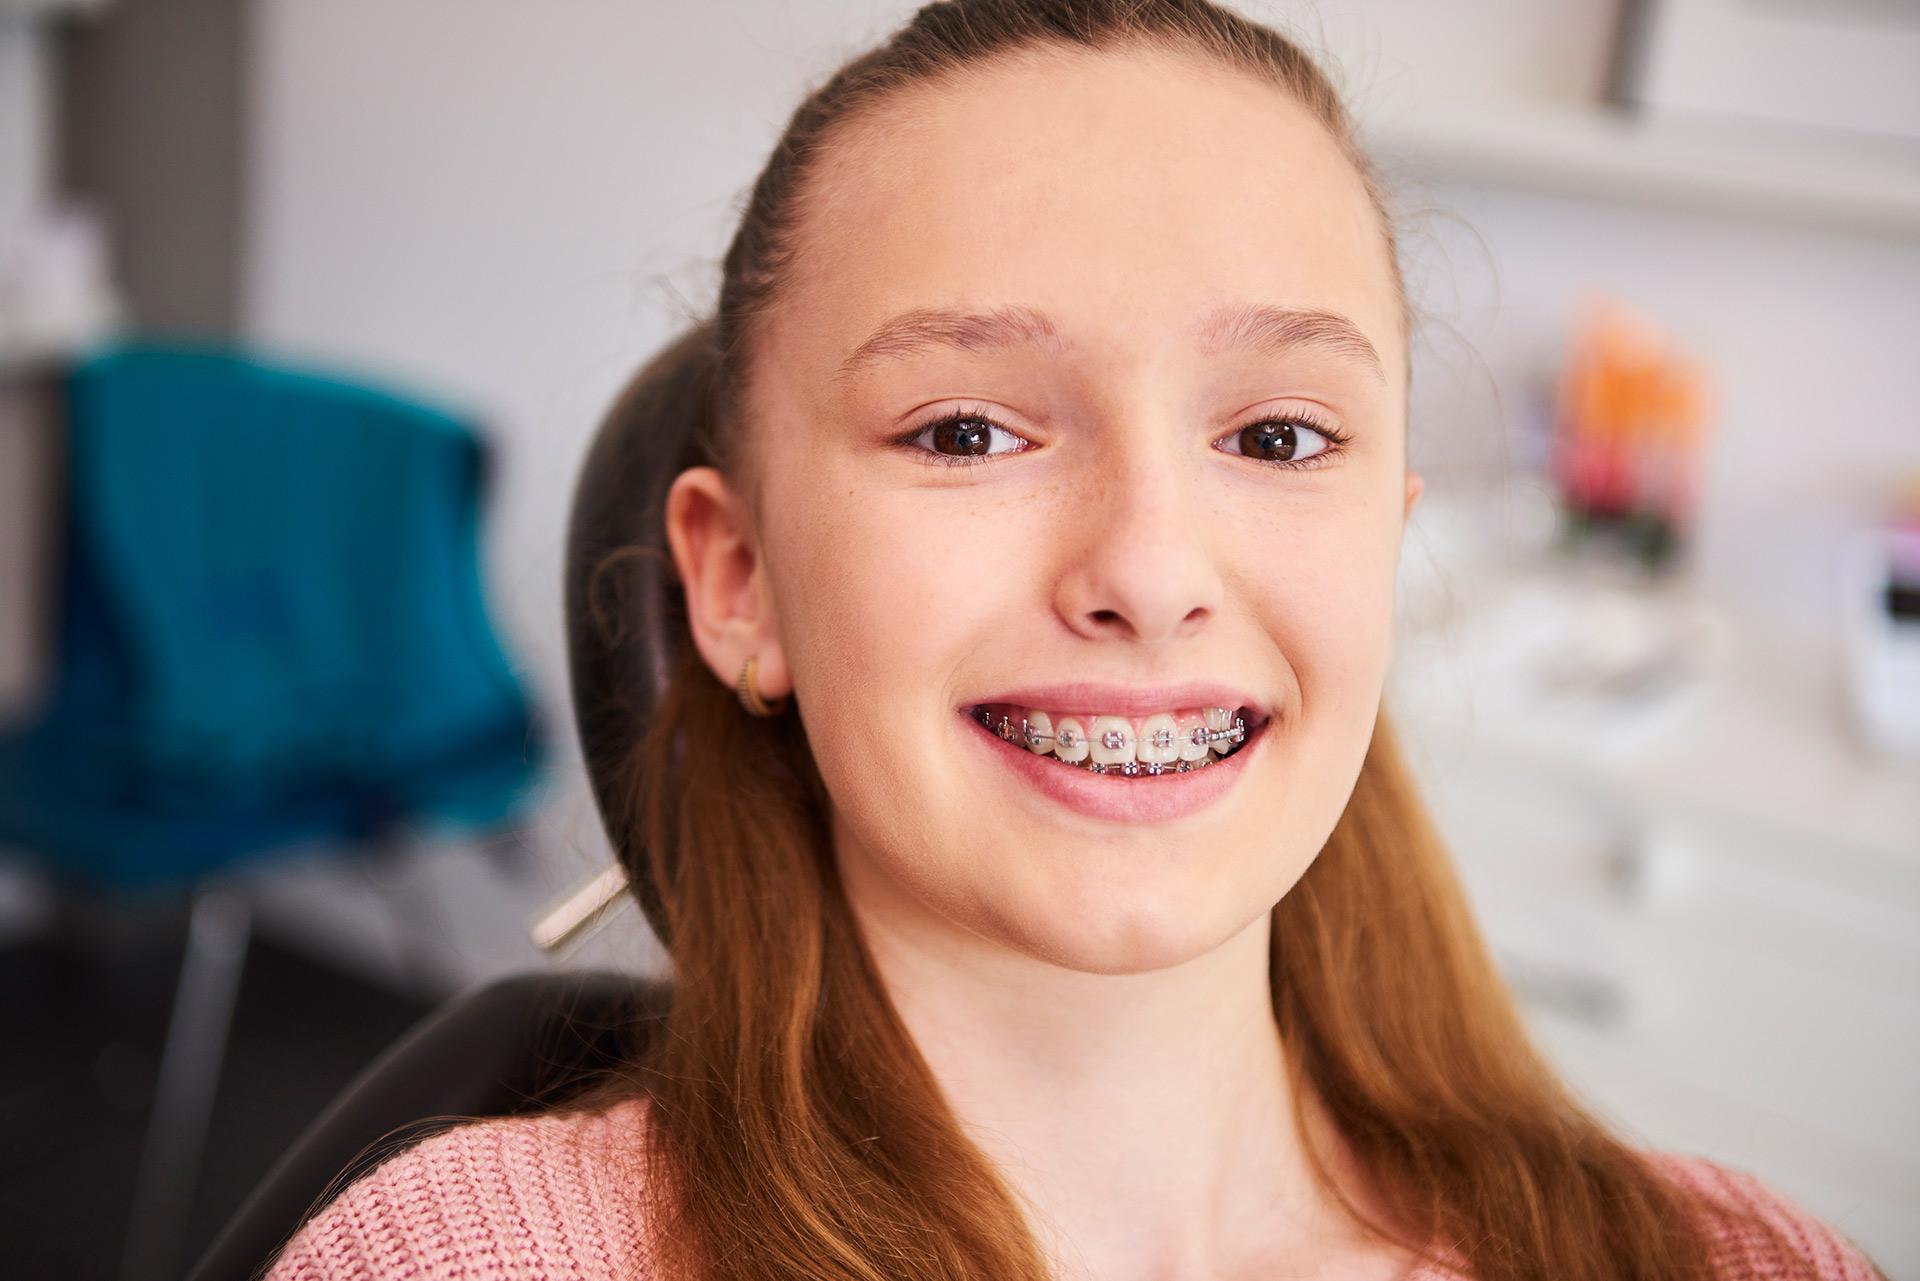 Young girl from La Crescenta at an appointment for her braces